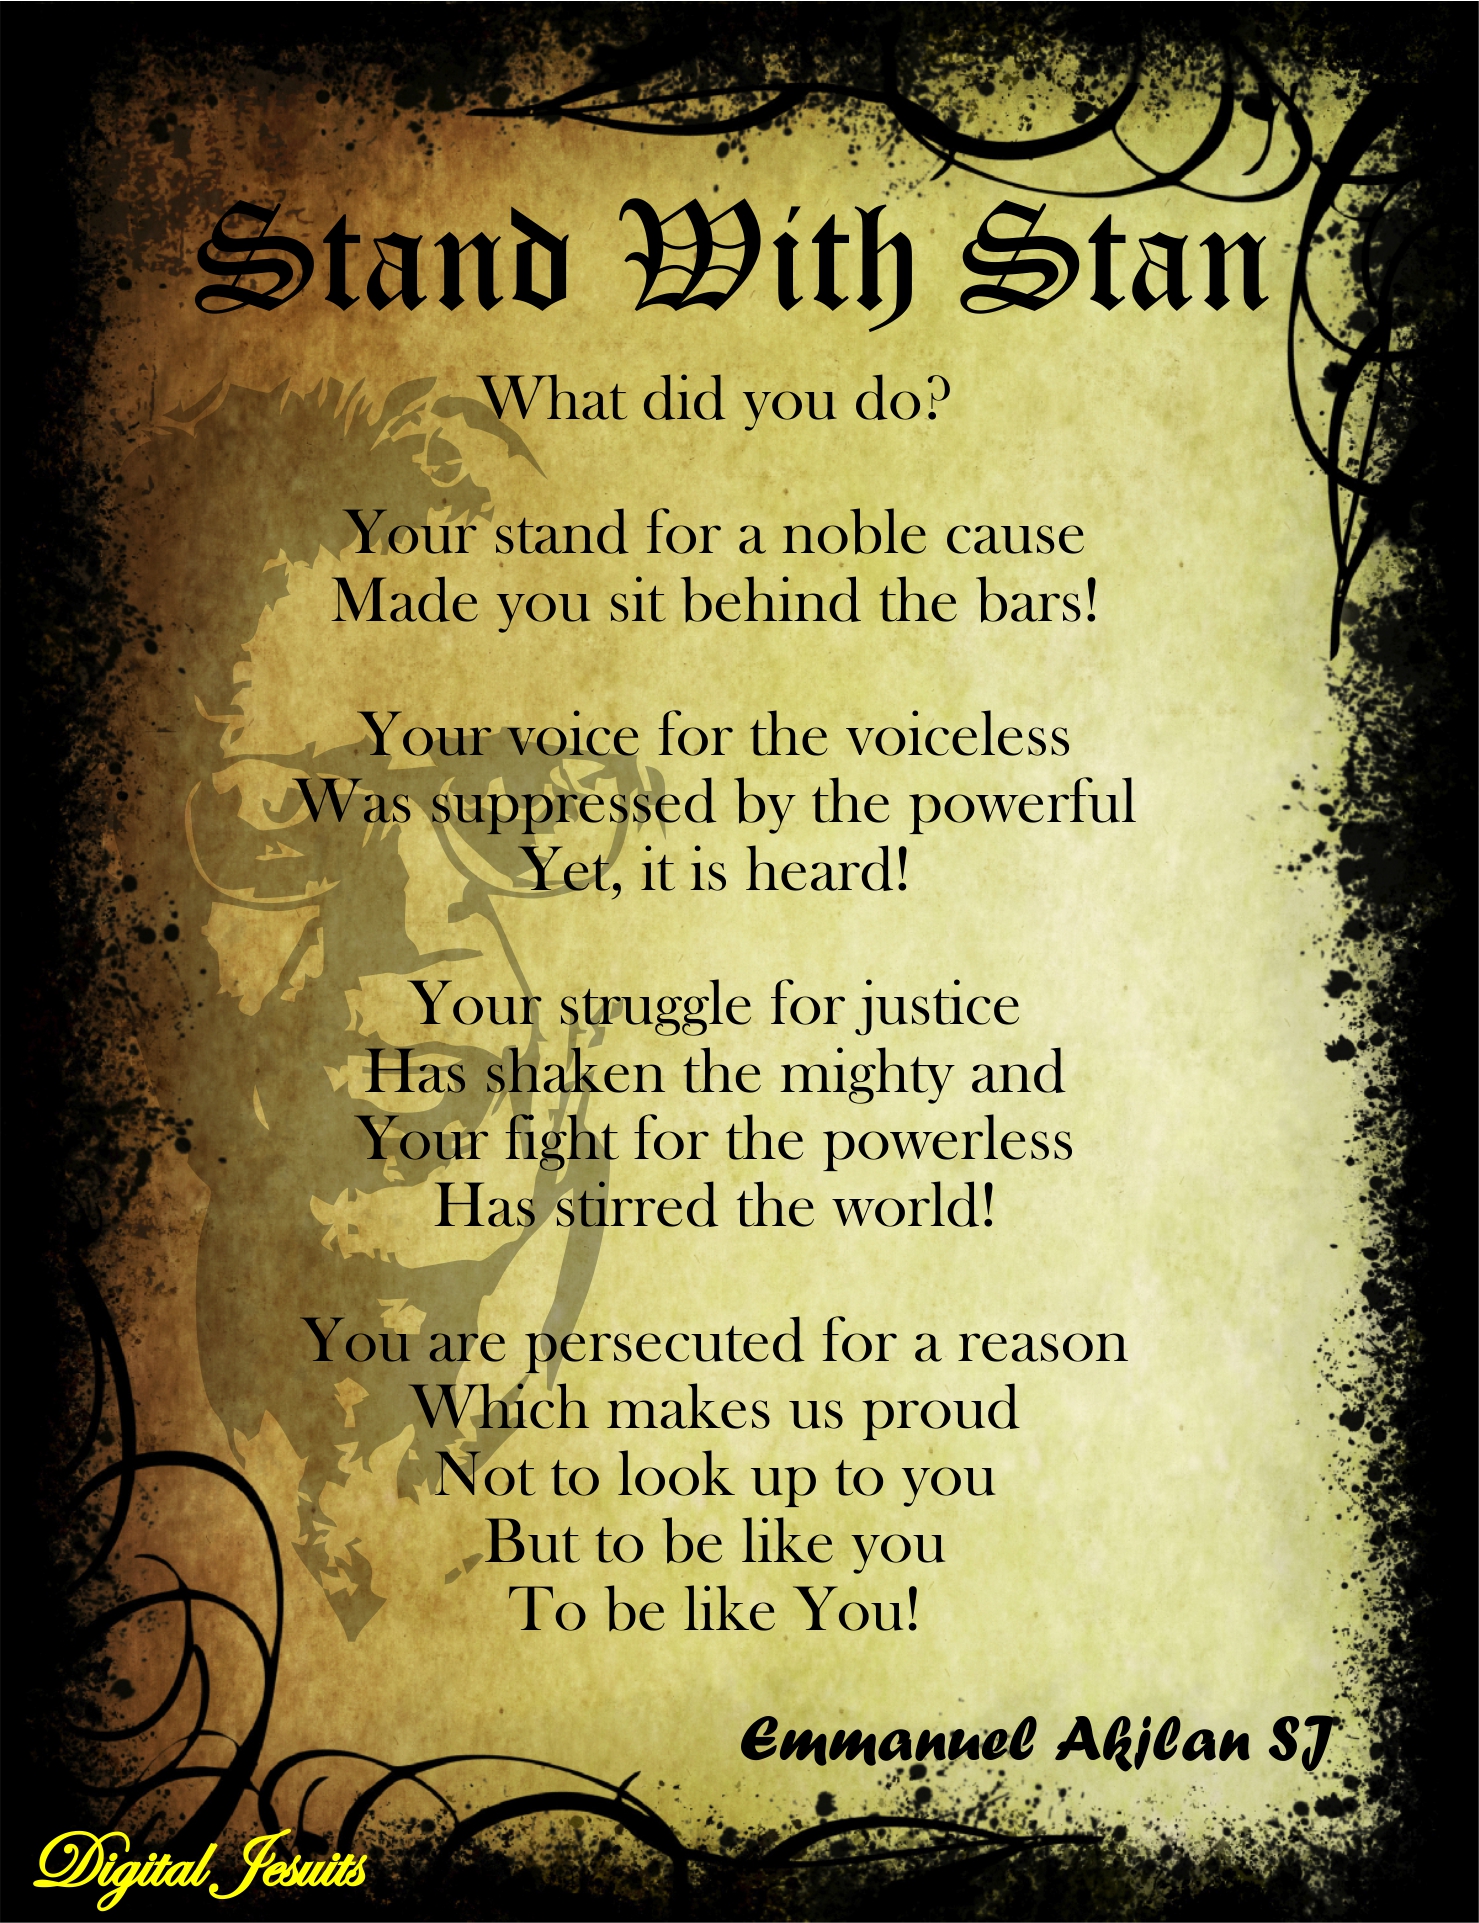 Stand with Stan